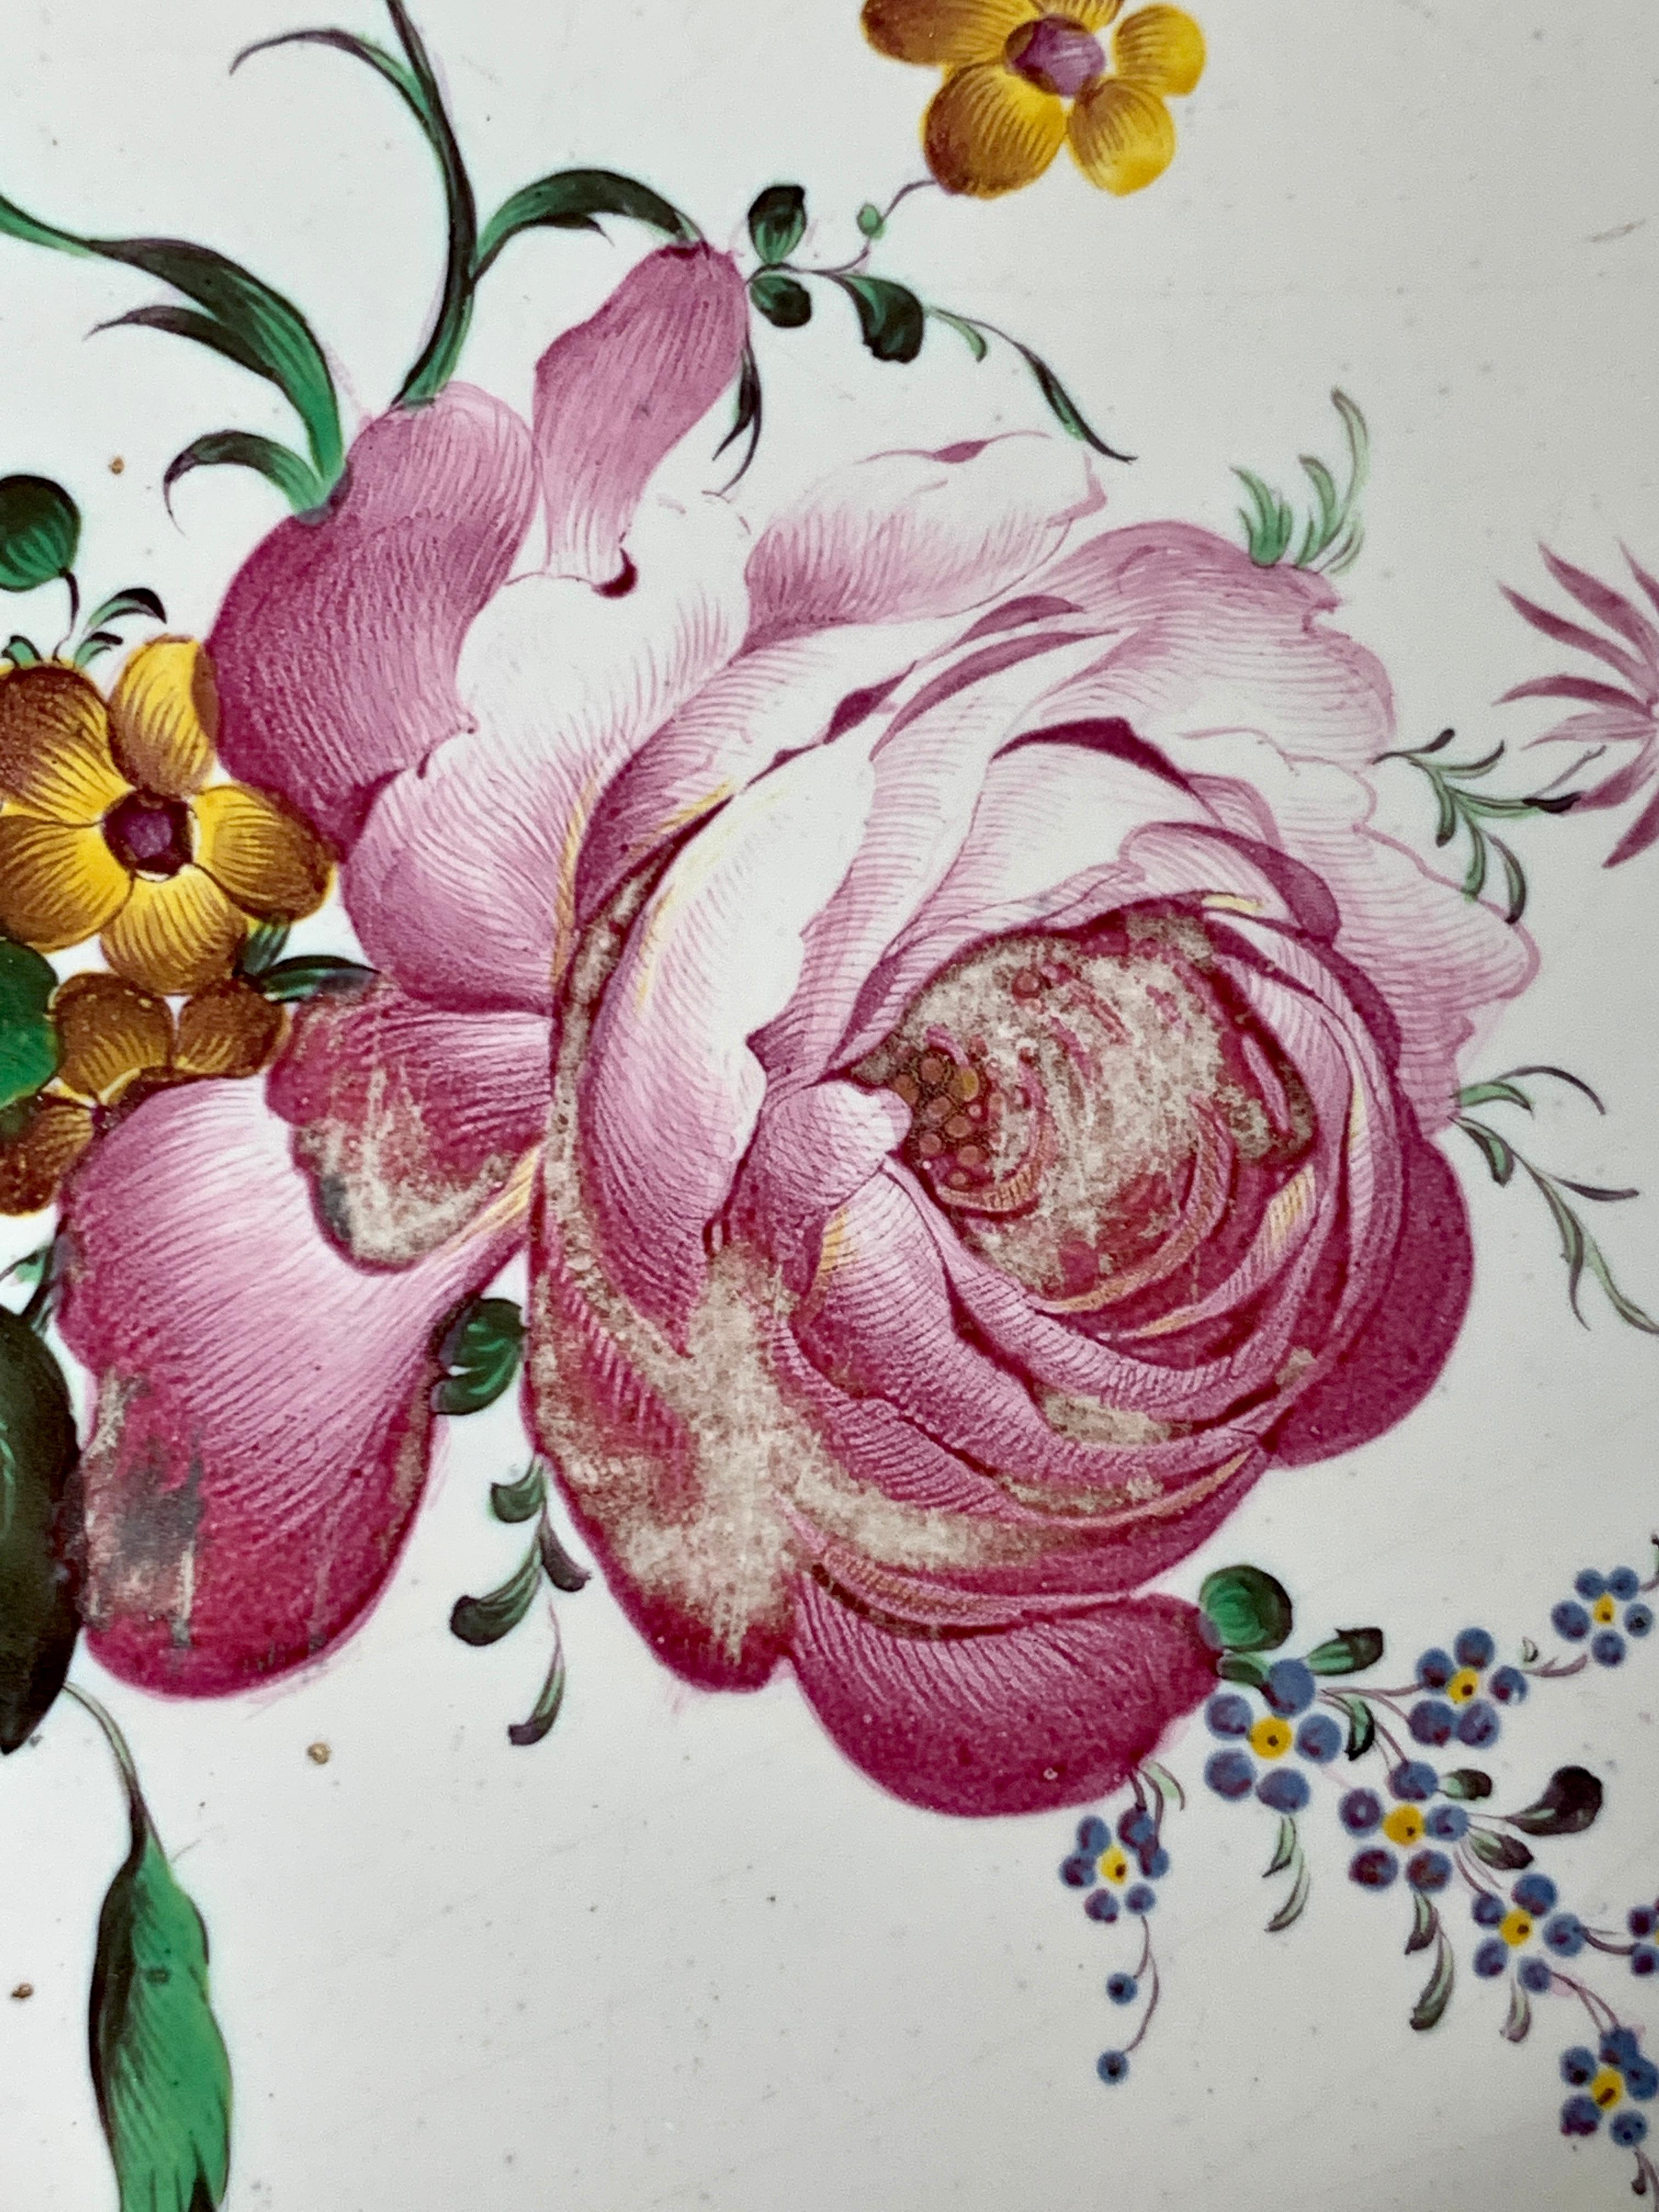 This 18th century faience dish was hand painted in the factory of Paul Hannong in Strasbourg, France. The flowers are exquisite.
I would almost call them delicious! Paul Hannong, and his brother Joseph, were known for the fabulous flower painting